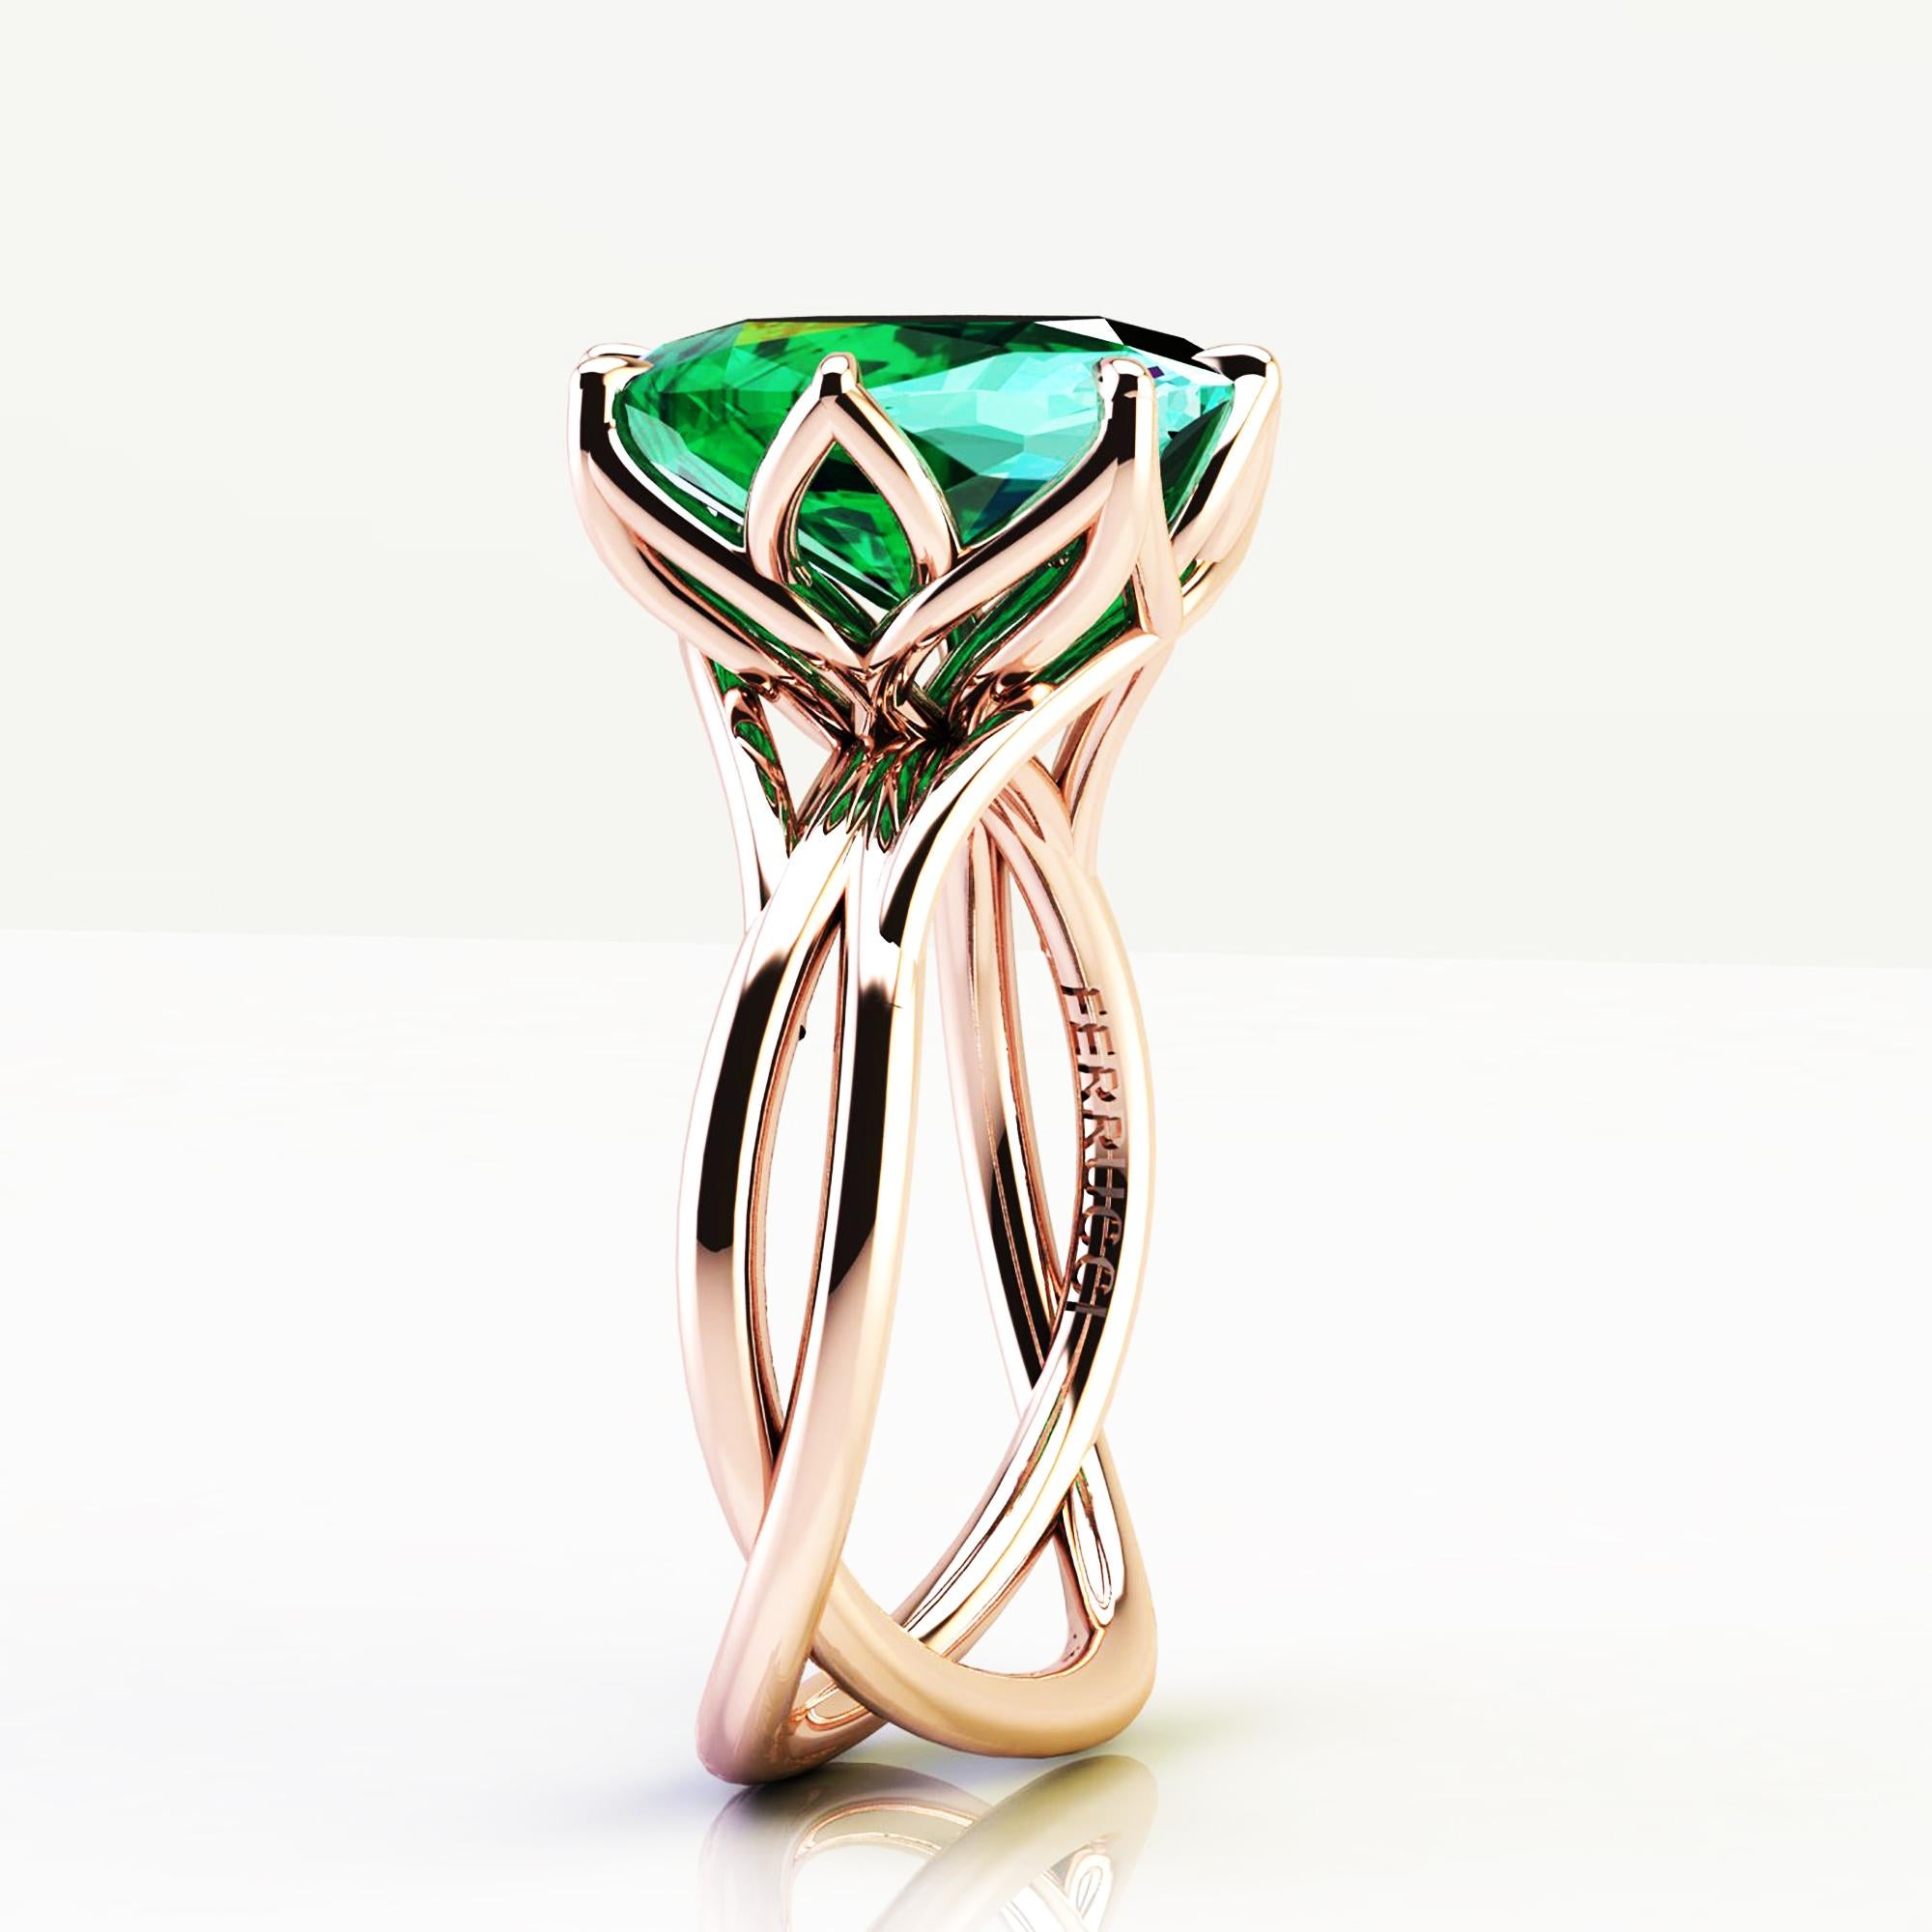 A Spectacular 5.42 carat natural Emerald of a deep green color, unique in its splendor, GIA Certified showing the minimal treatments applied, in a one of a kind, hand made 18k rose gold ring, designed and conceived in New York City. A design that